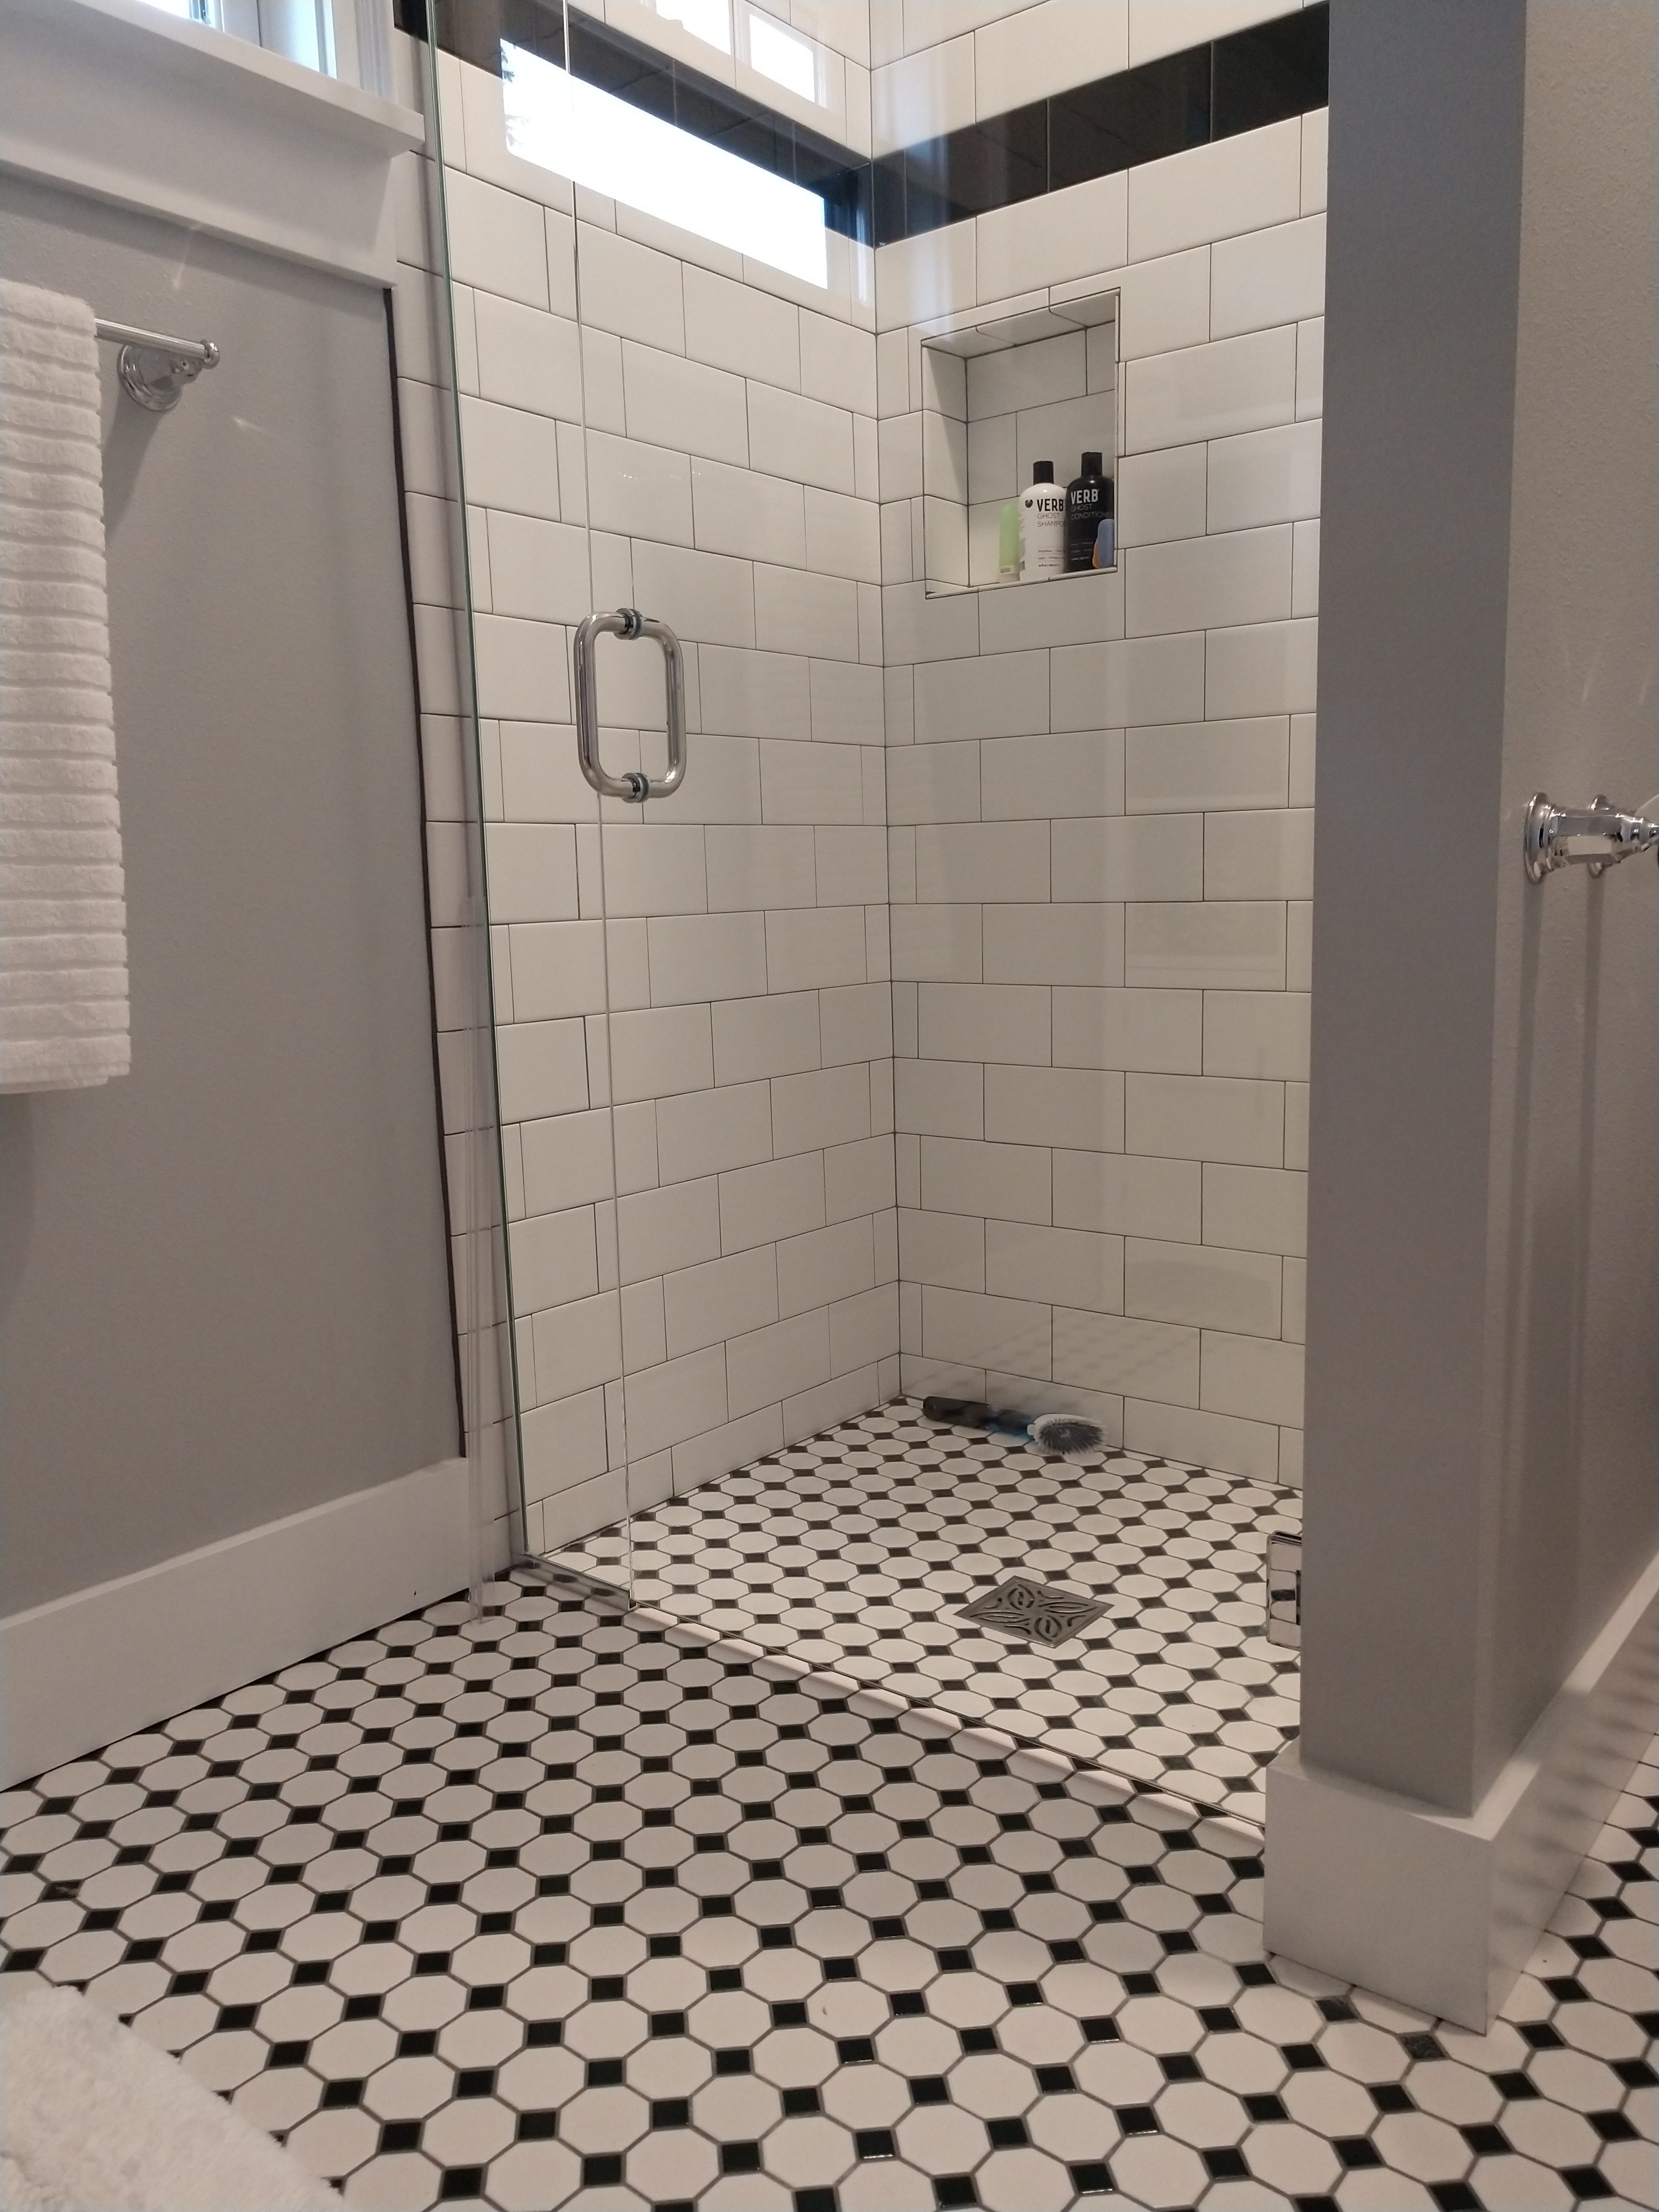 Bathroom Floor Tile Can Make A Big Difference Rose Construction Inc